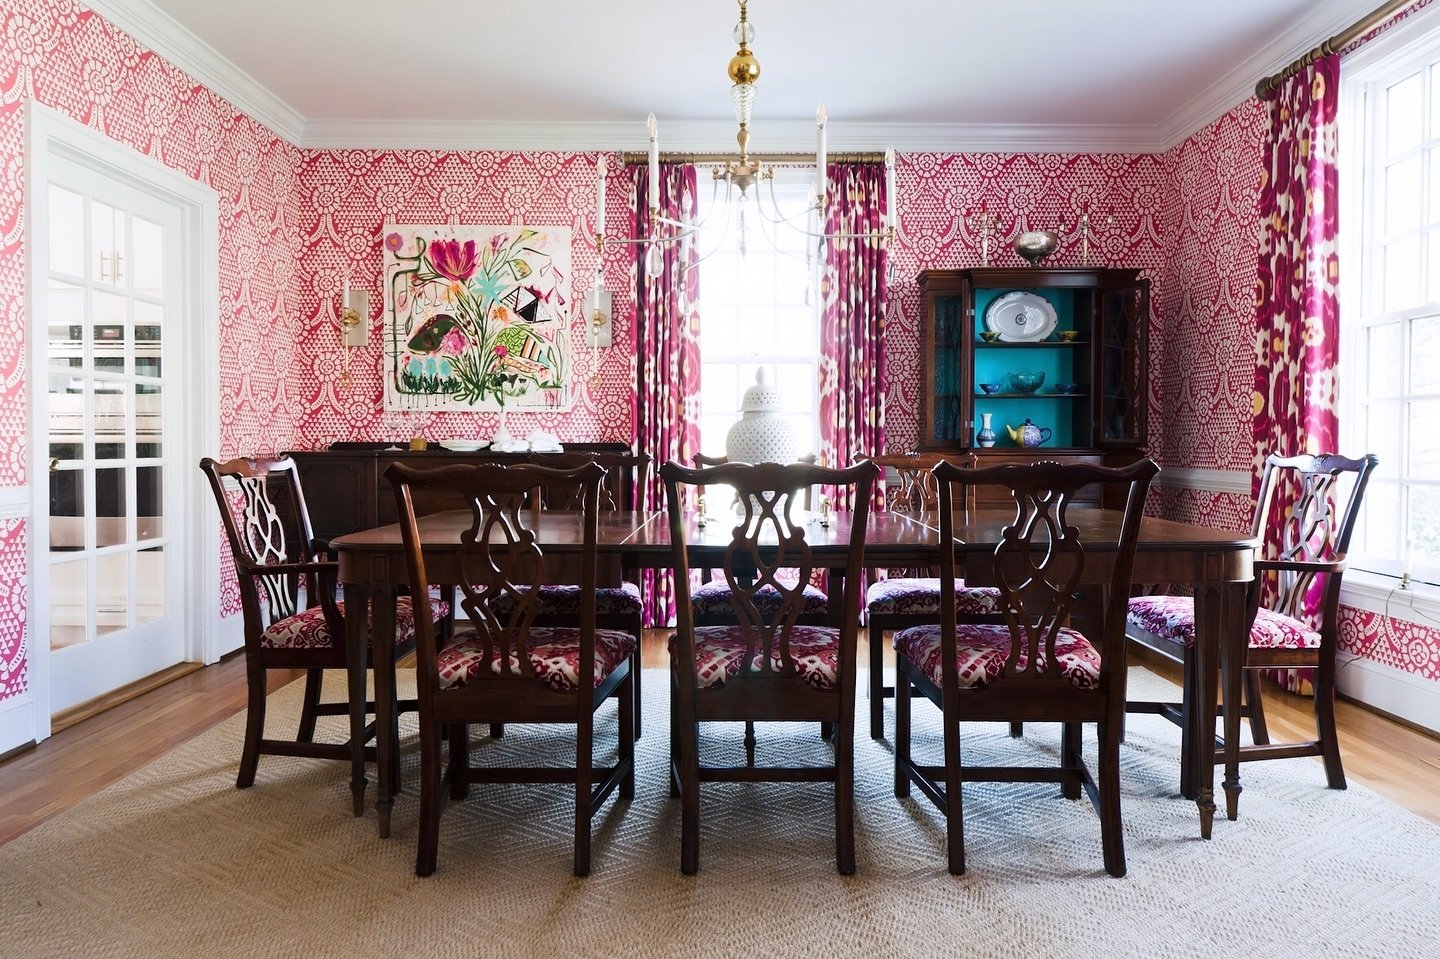 Stunning selections for new wallpaper, rug, window treatments, custom art, and chandelier and sconces&nbsp;made this homeowner&rsquo;s existing heirloom furniture shimmer in the newly designed dining room.&nbsp;#thibaut
.
.
.
#courtneyludemaninterior